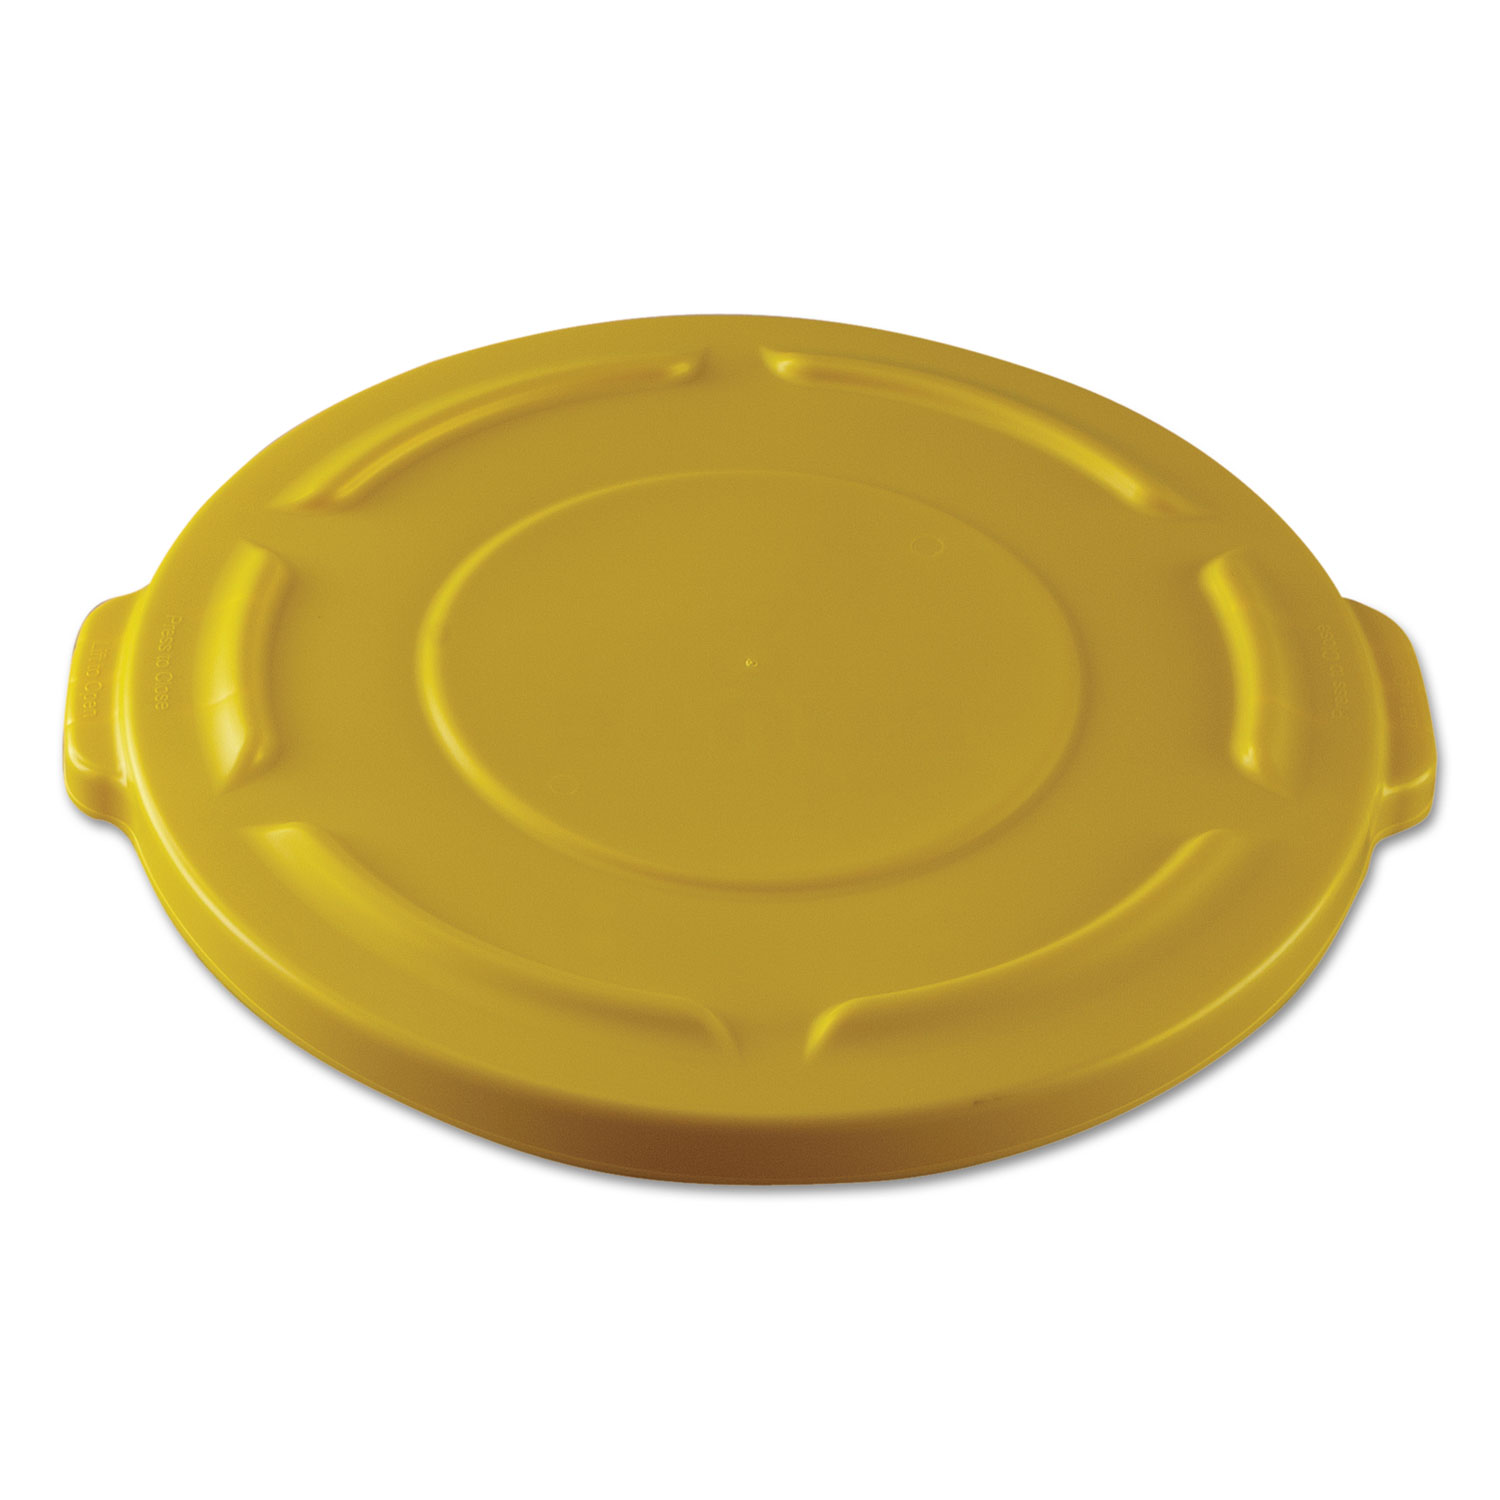 Round Flat Top Lid, for 20-Gallon Round Brute Containers, 19 4/5, dia., Yellow